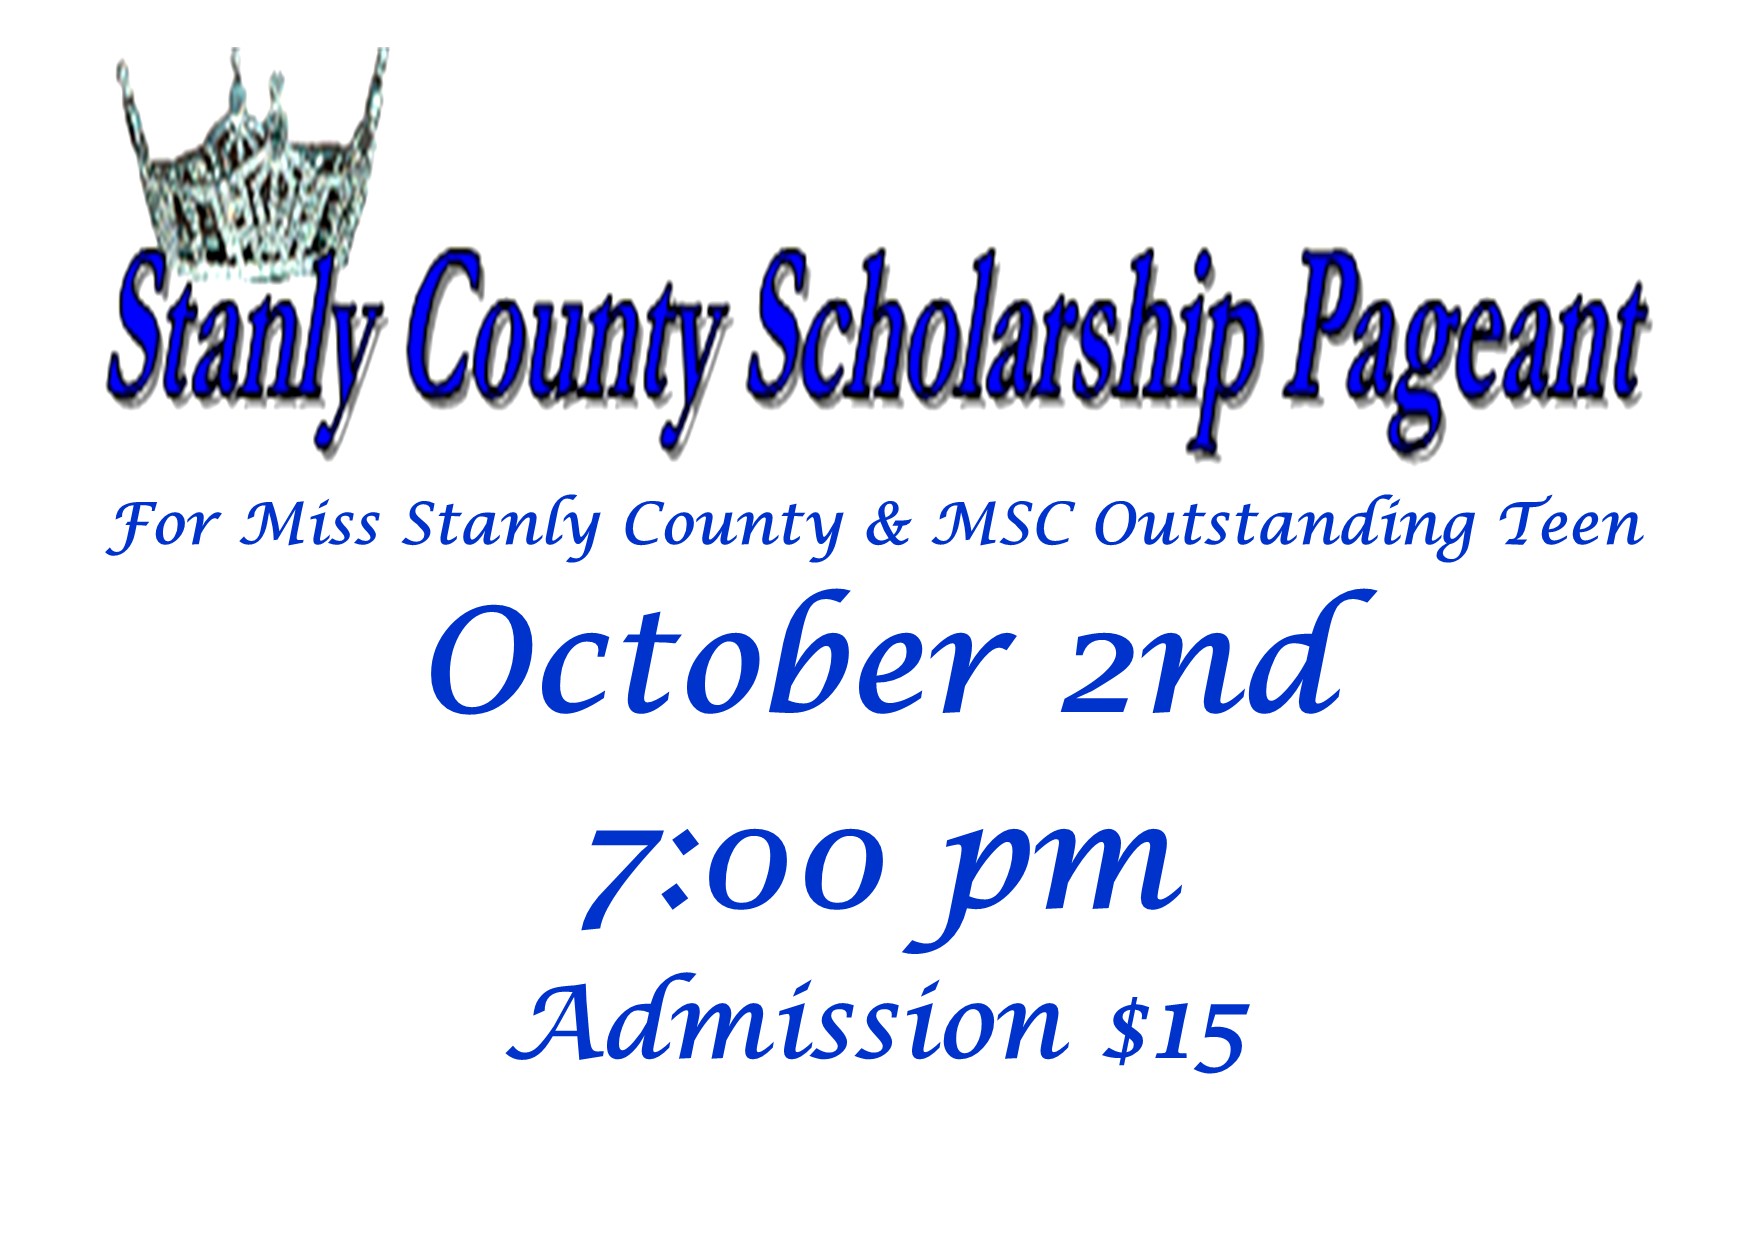 Miss Stanly County Pageant